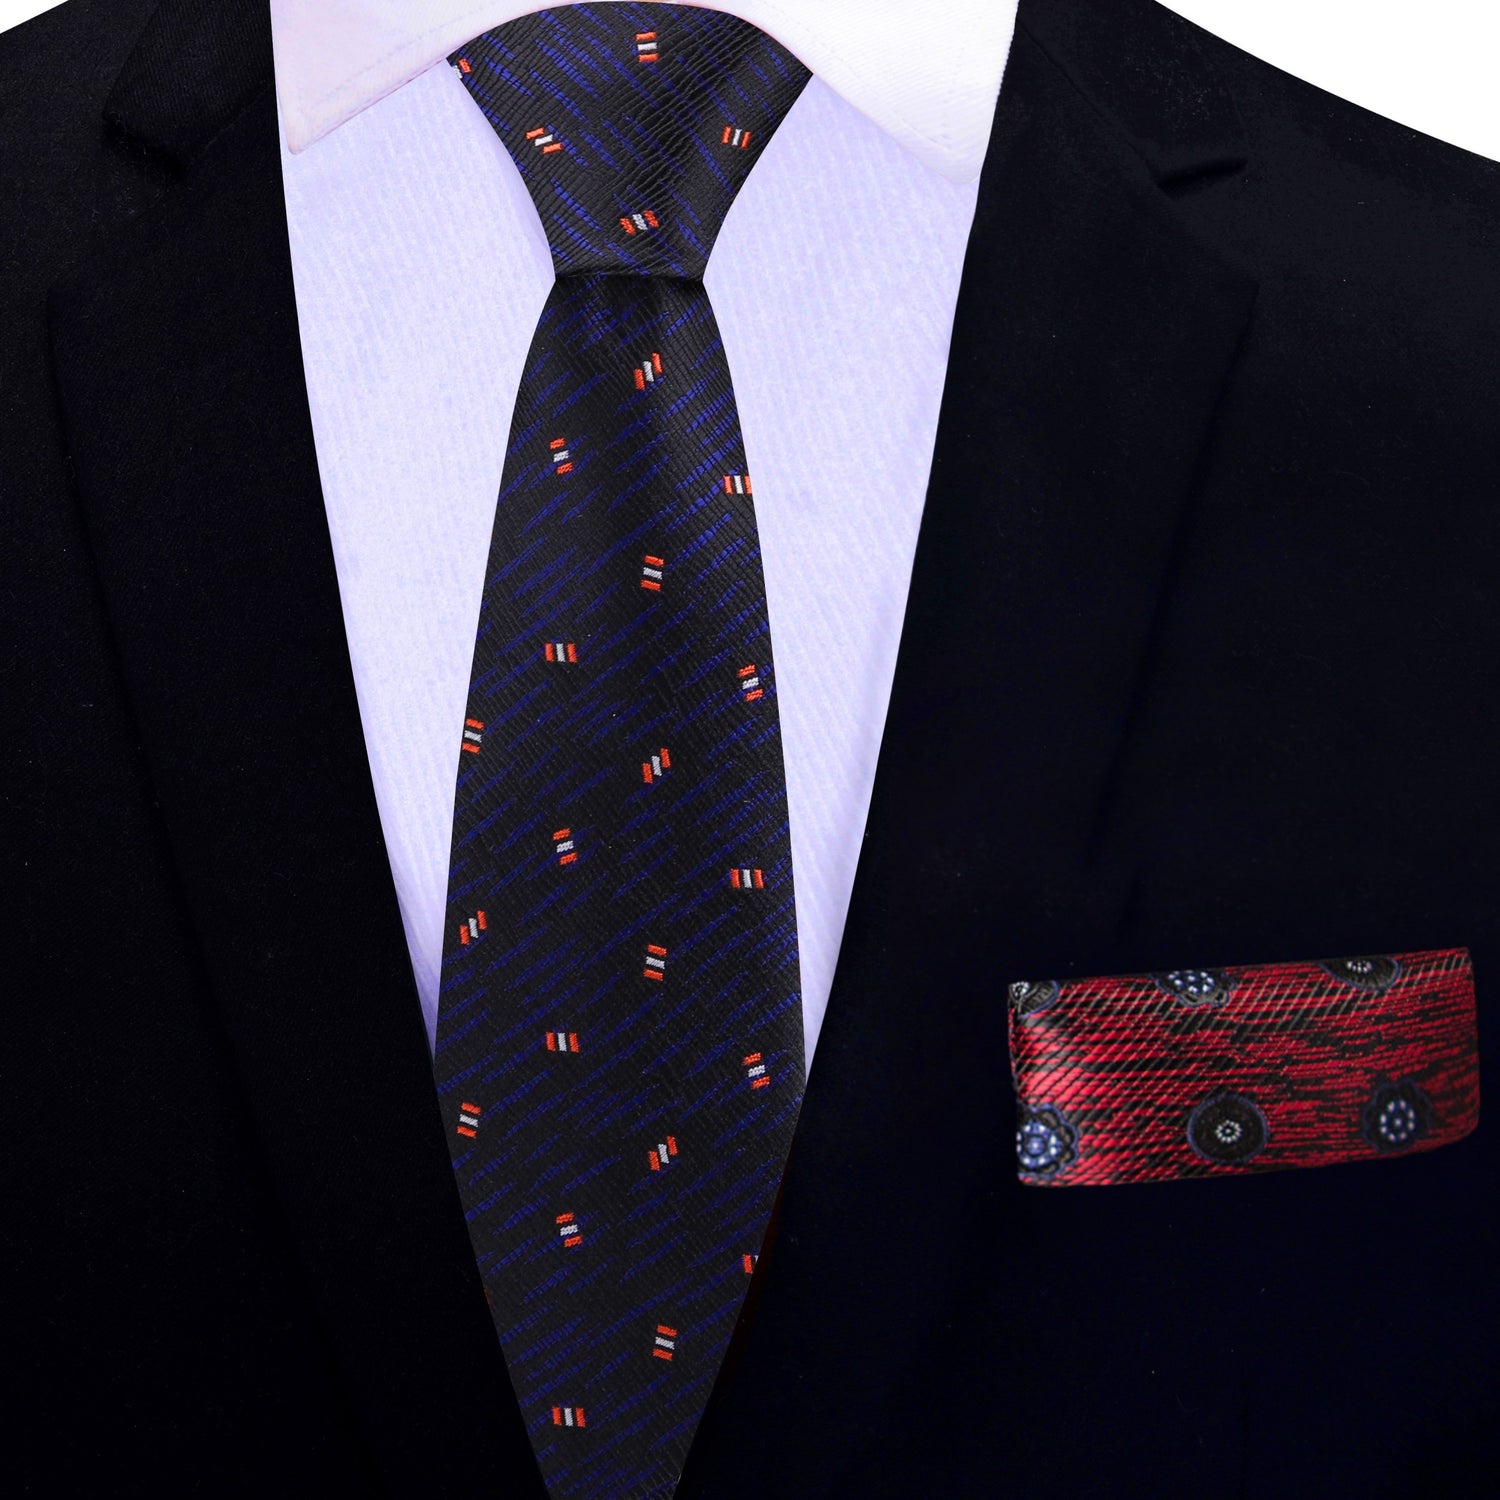 Thin Tie: Black, Dark Indigo, Red, Abstract Tie and Accenting Red Geometric Square